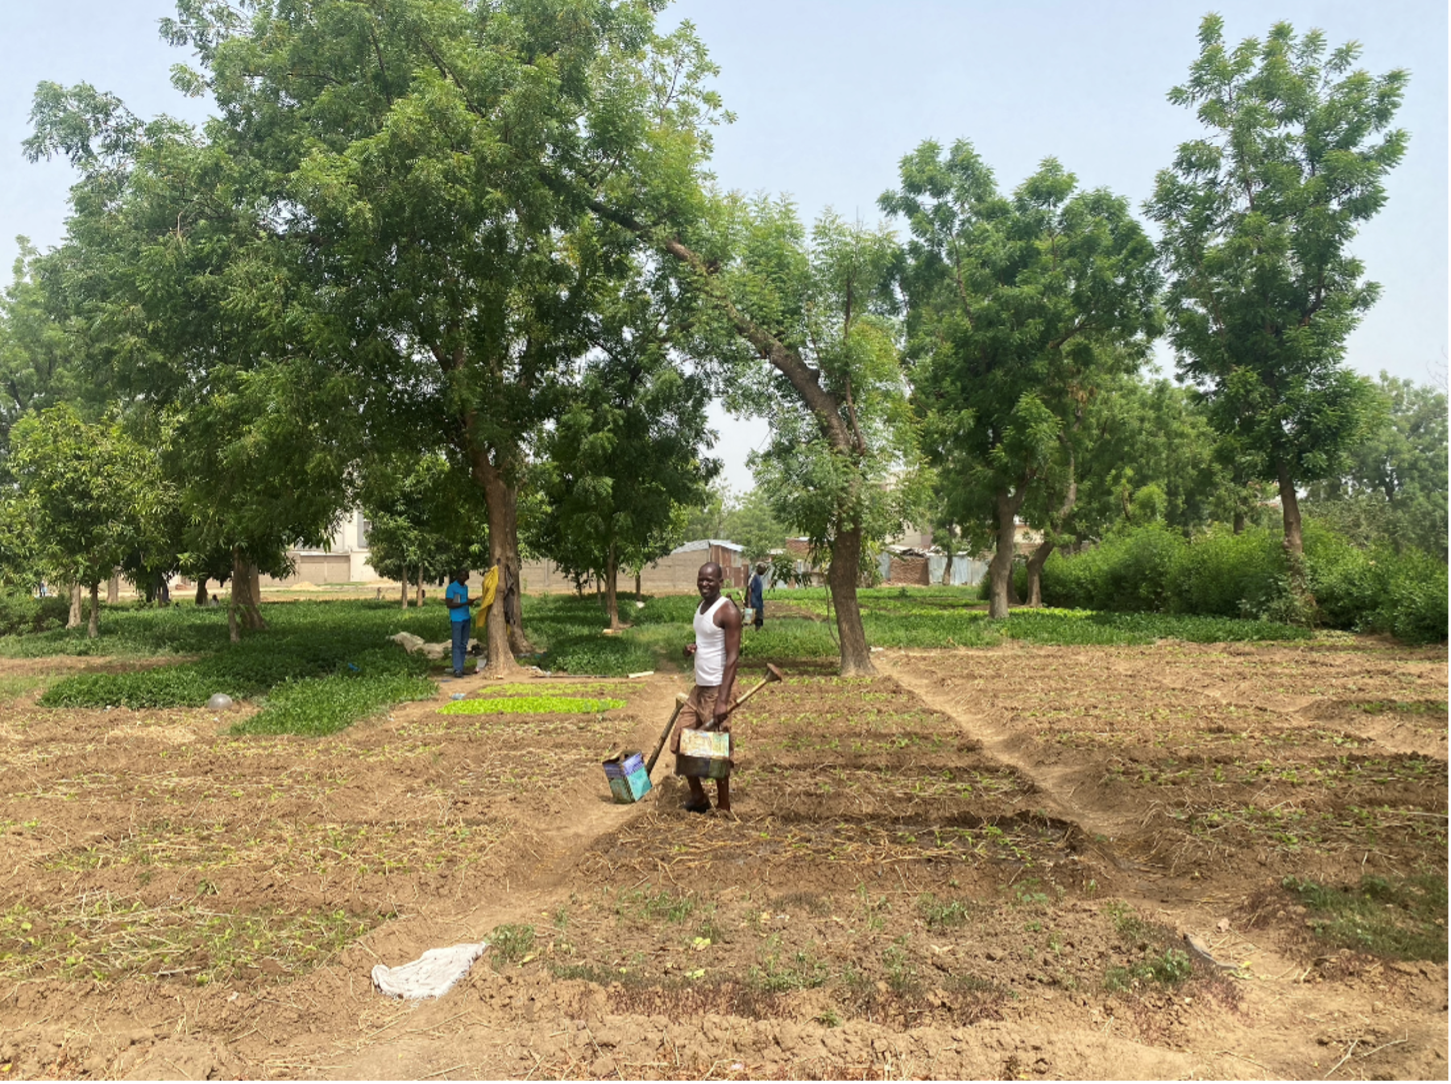 Figure 9: Urban agriculture in N’Djamena, Chad, can support urban resilience and livelihoods. Source: World Bank 